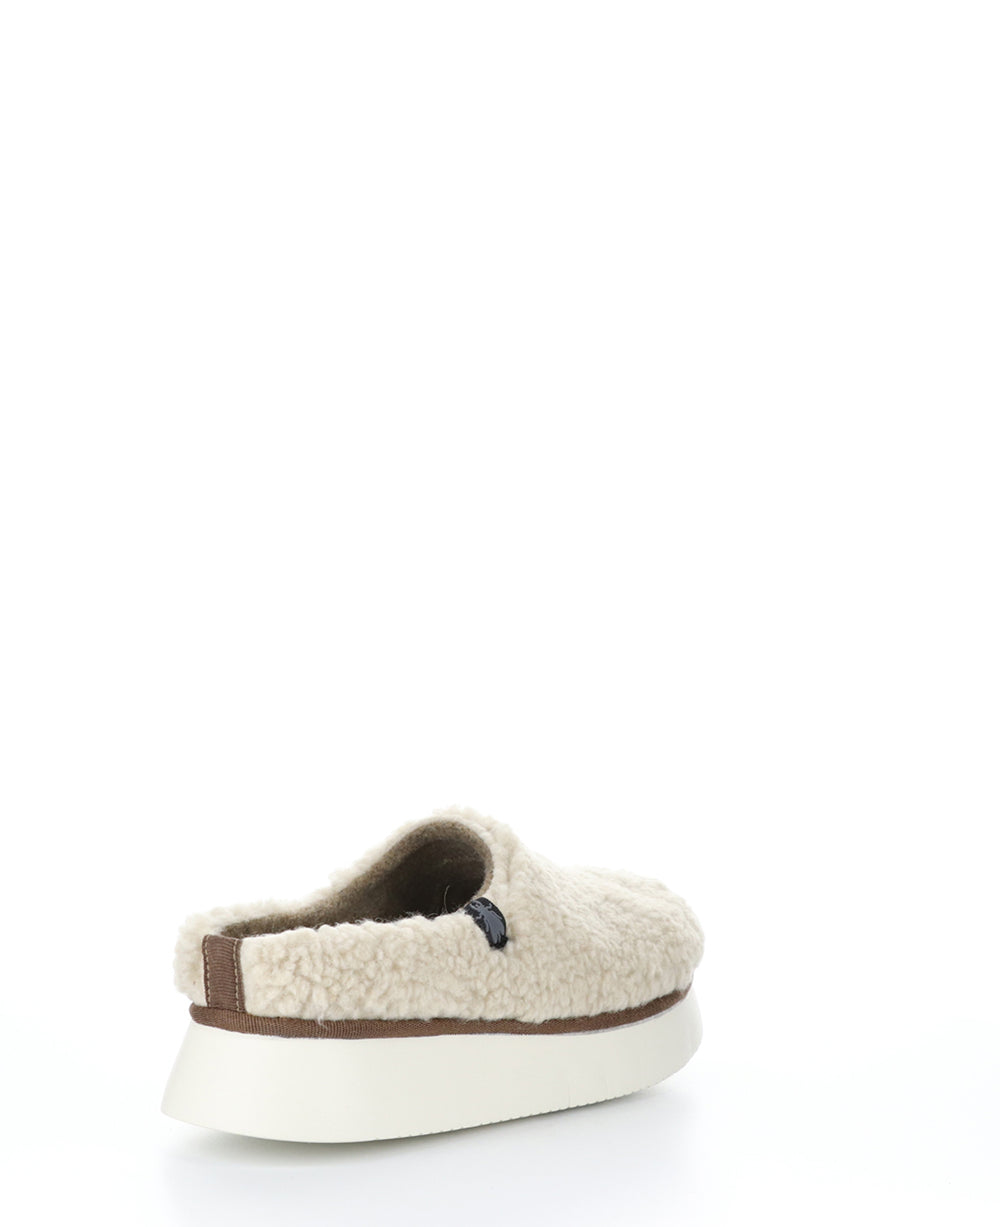 CAFE360FLY TAUPE Round Toe Clogs